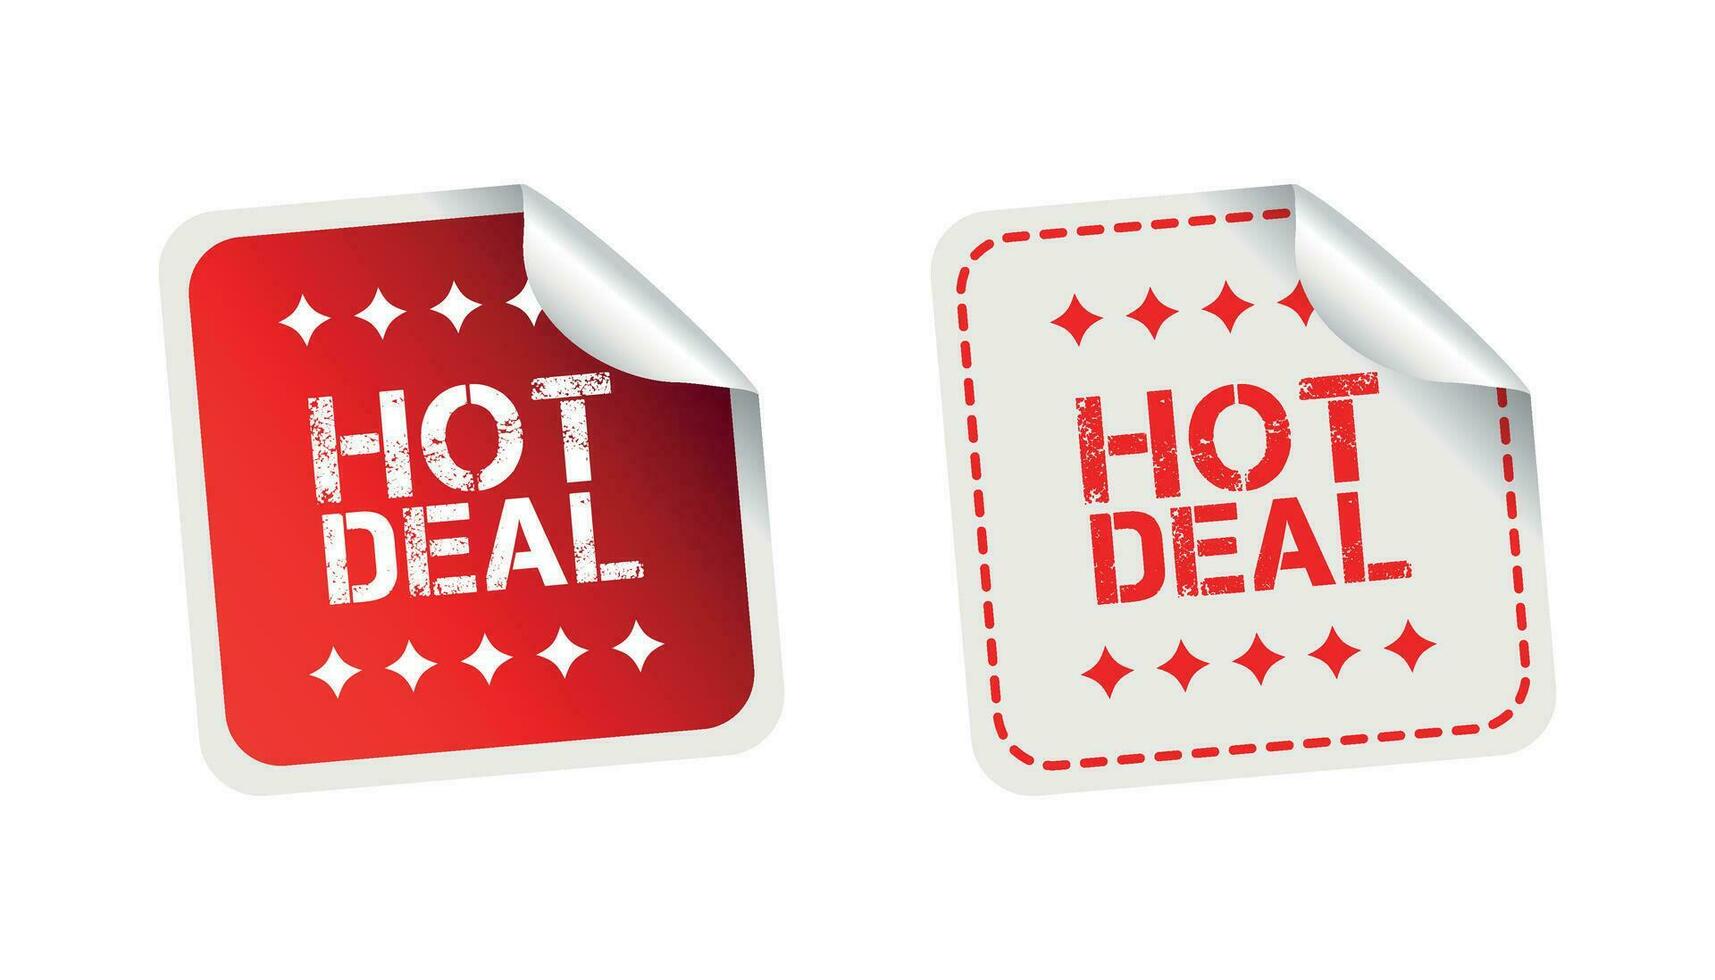 Hot deal sticker. Business sale red tag label vector illustration on white background.